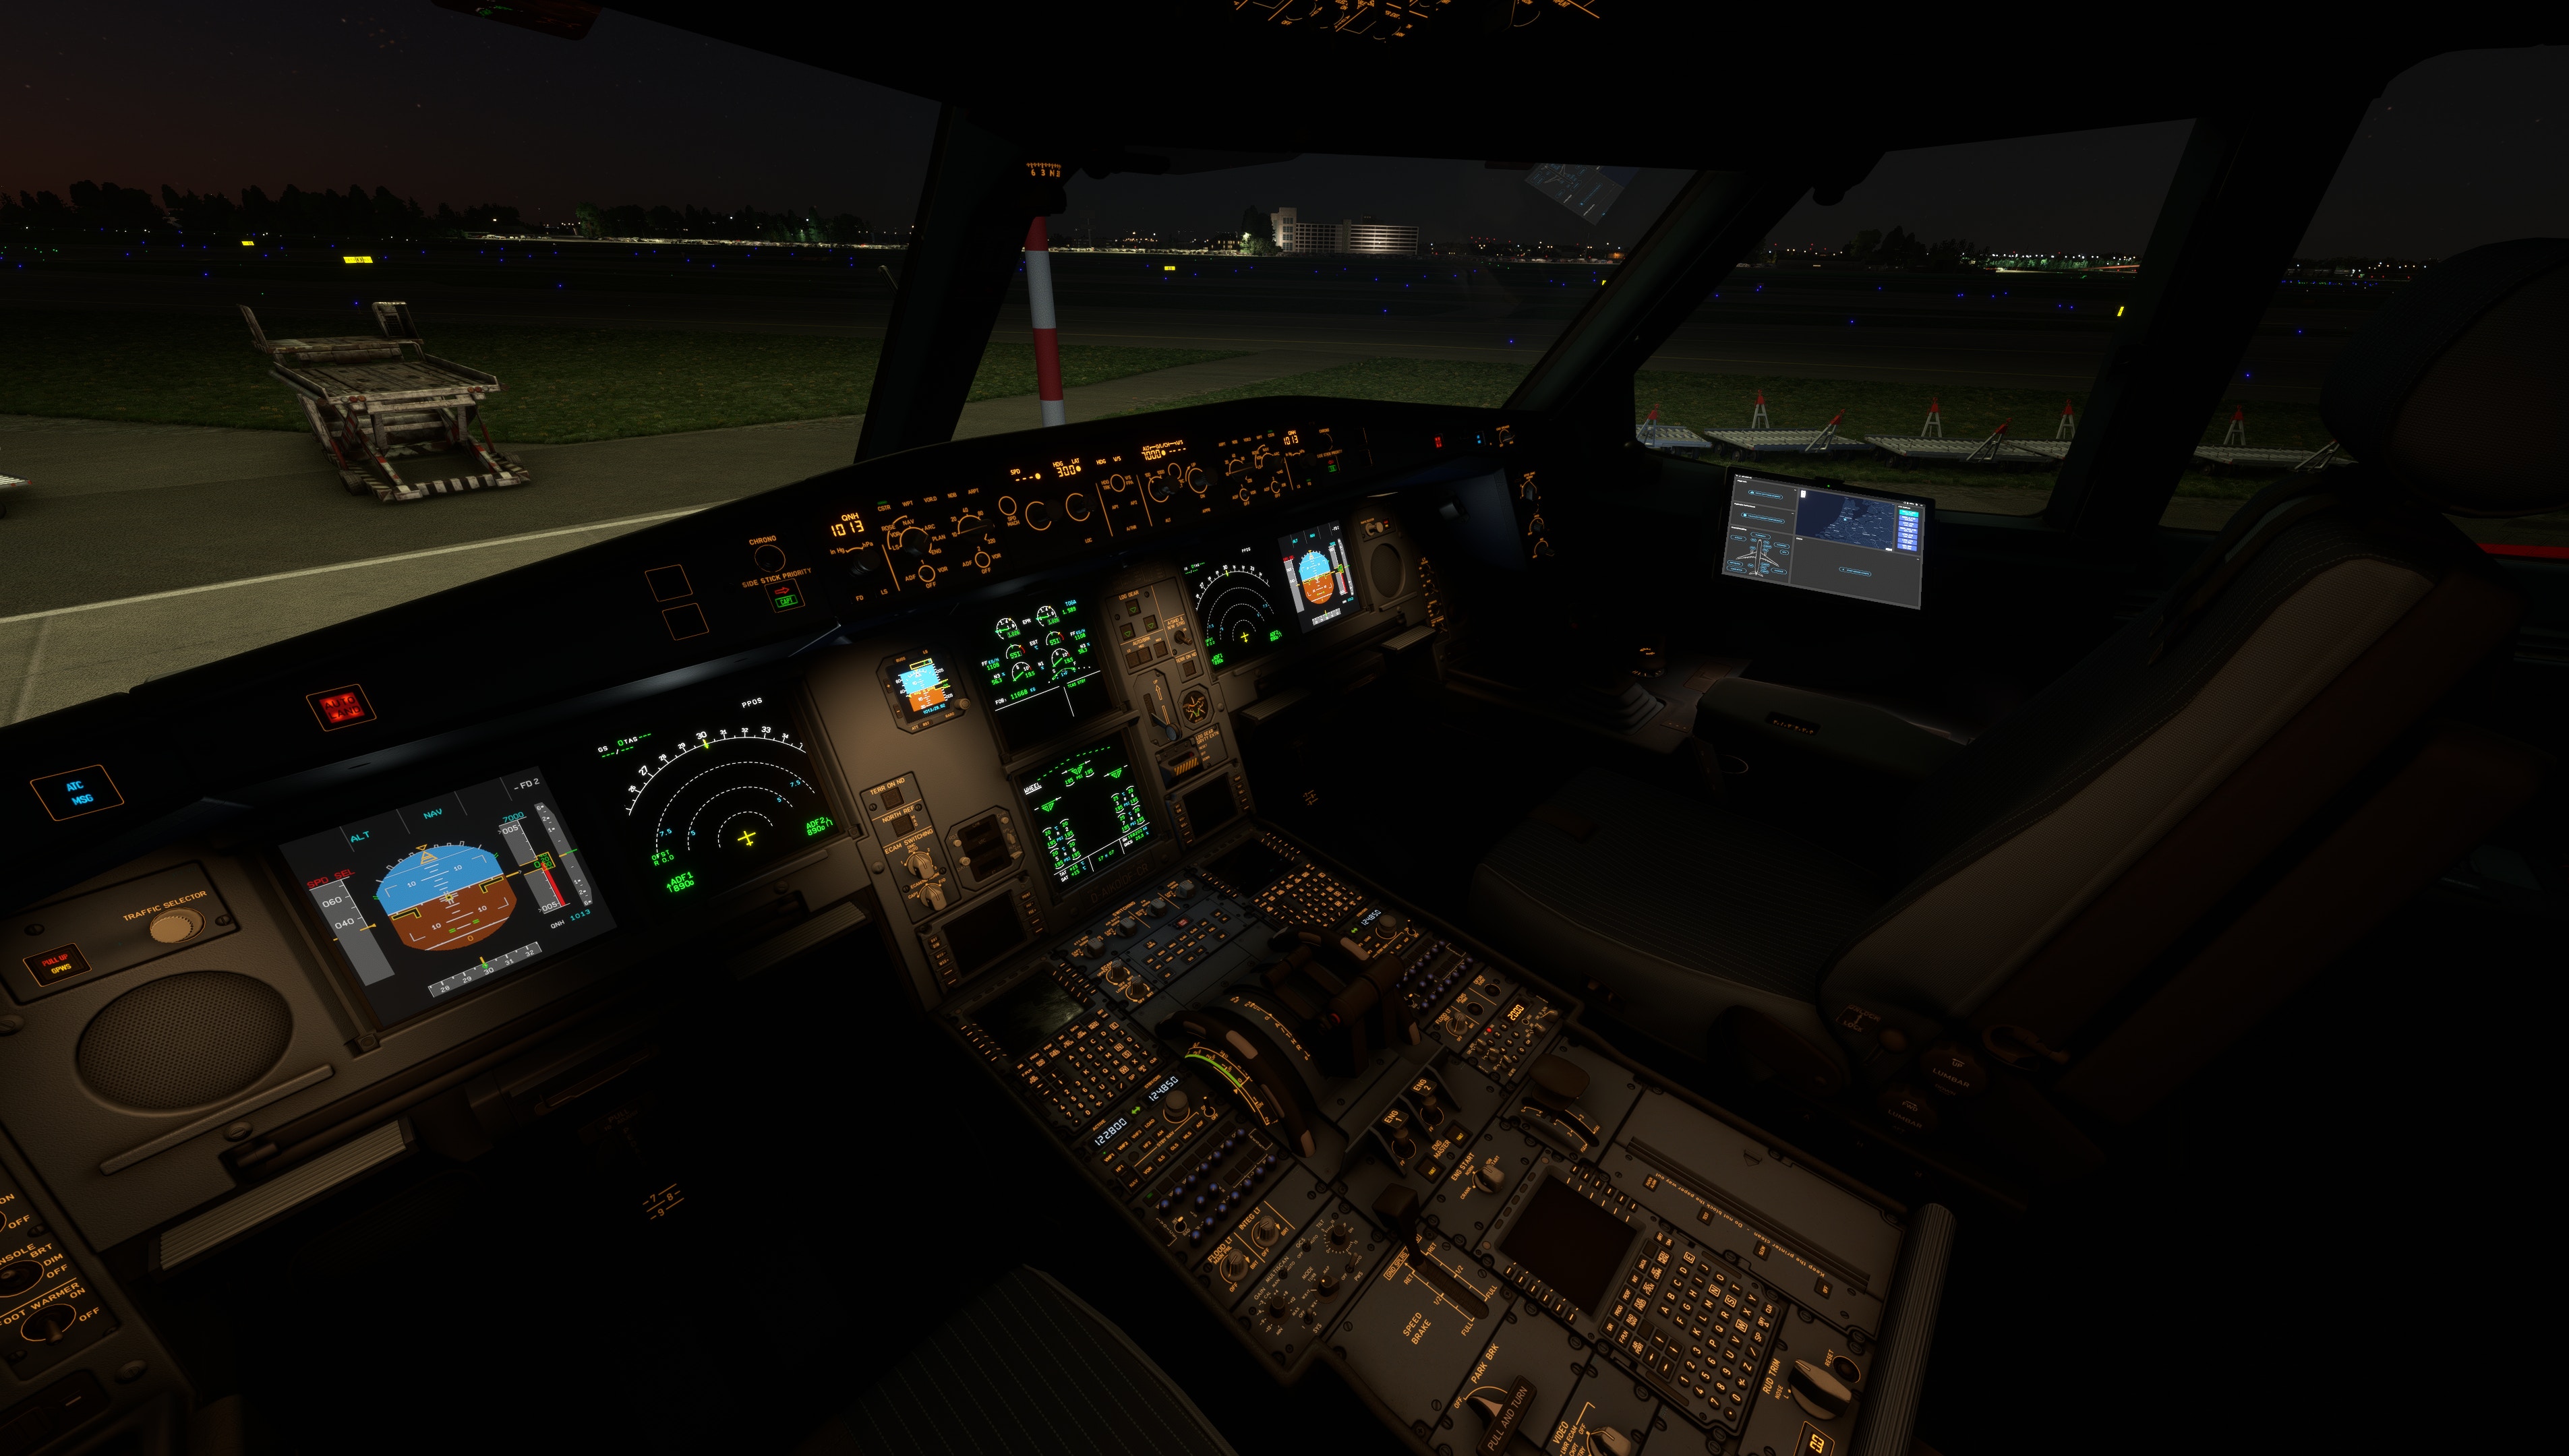 Aerosoft Provides Pricing Indication for Airbus A330